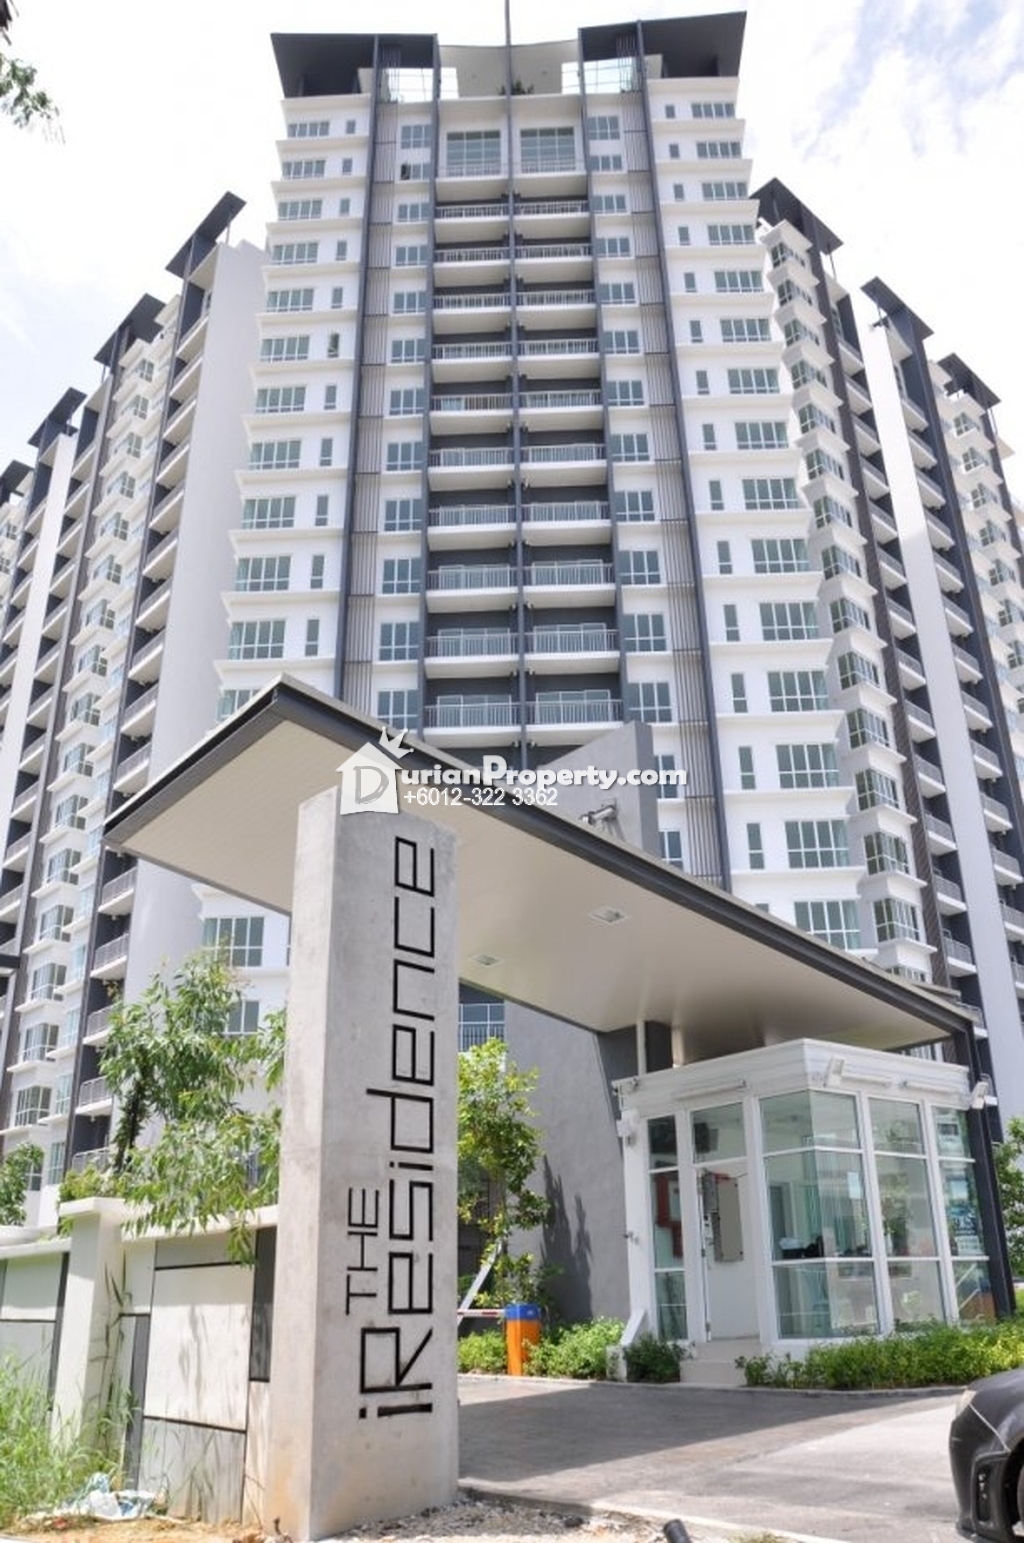 Condo For Rent At The Iresidence Bandar Mahkota Cheras For Rm 1 700 By Jeremy Wong Durianproperty